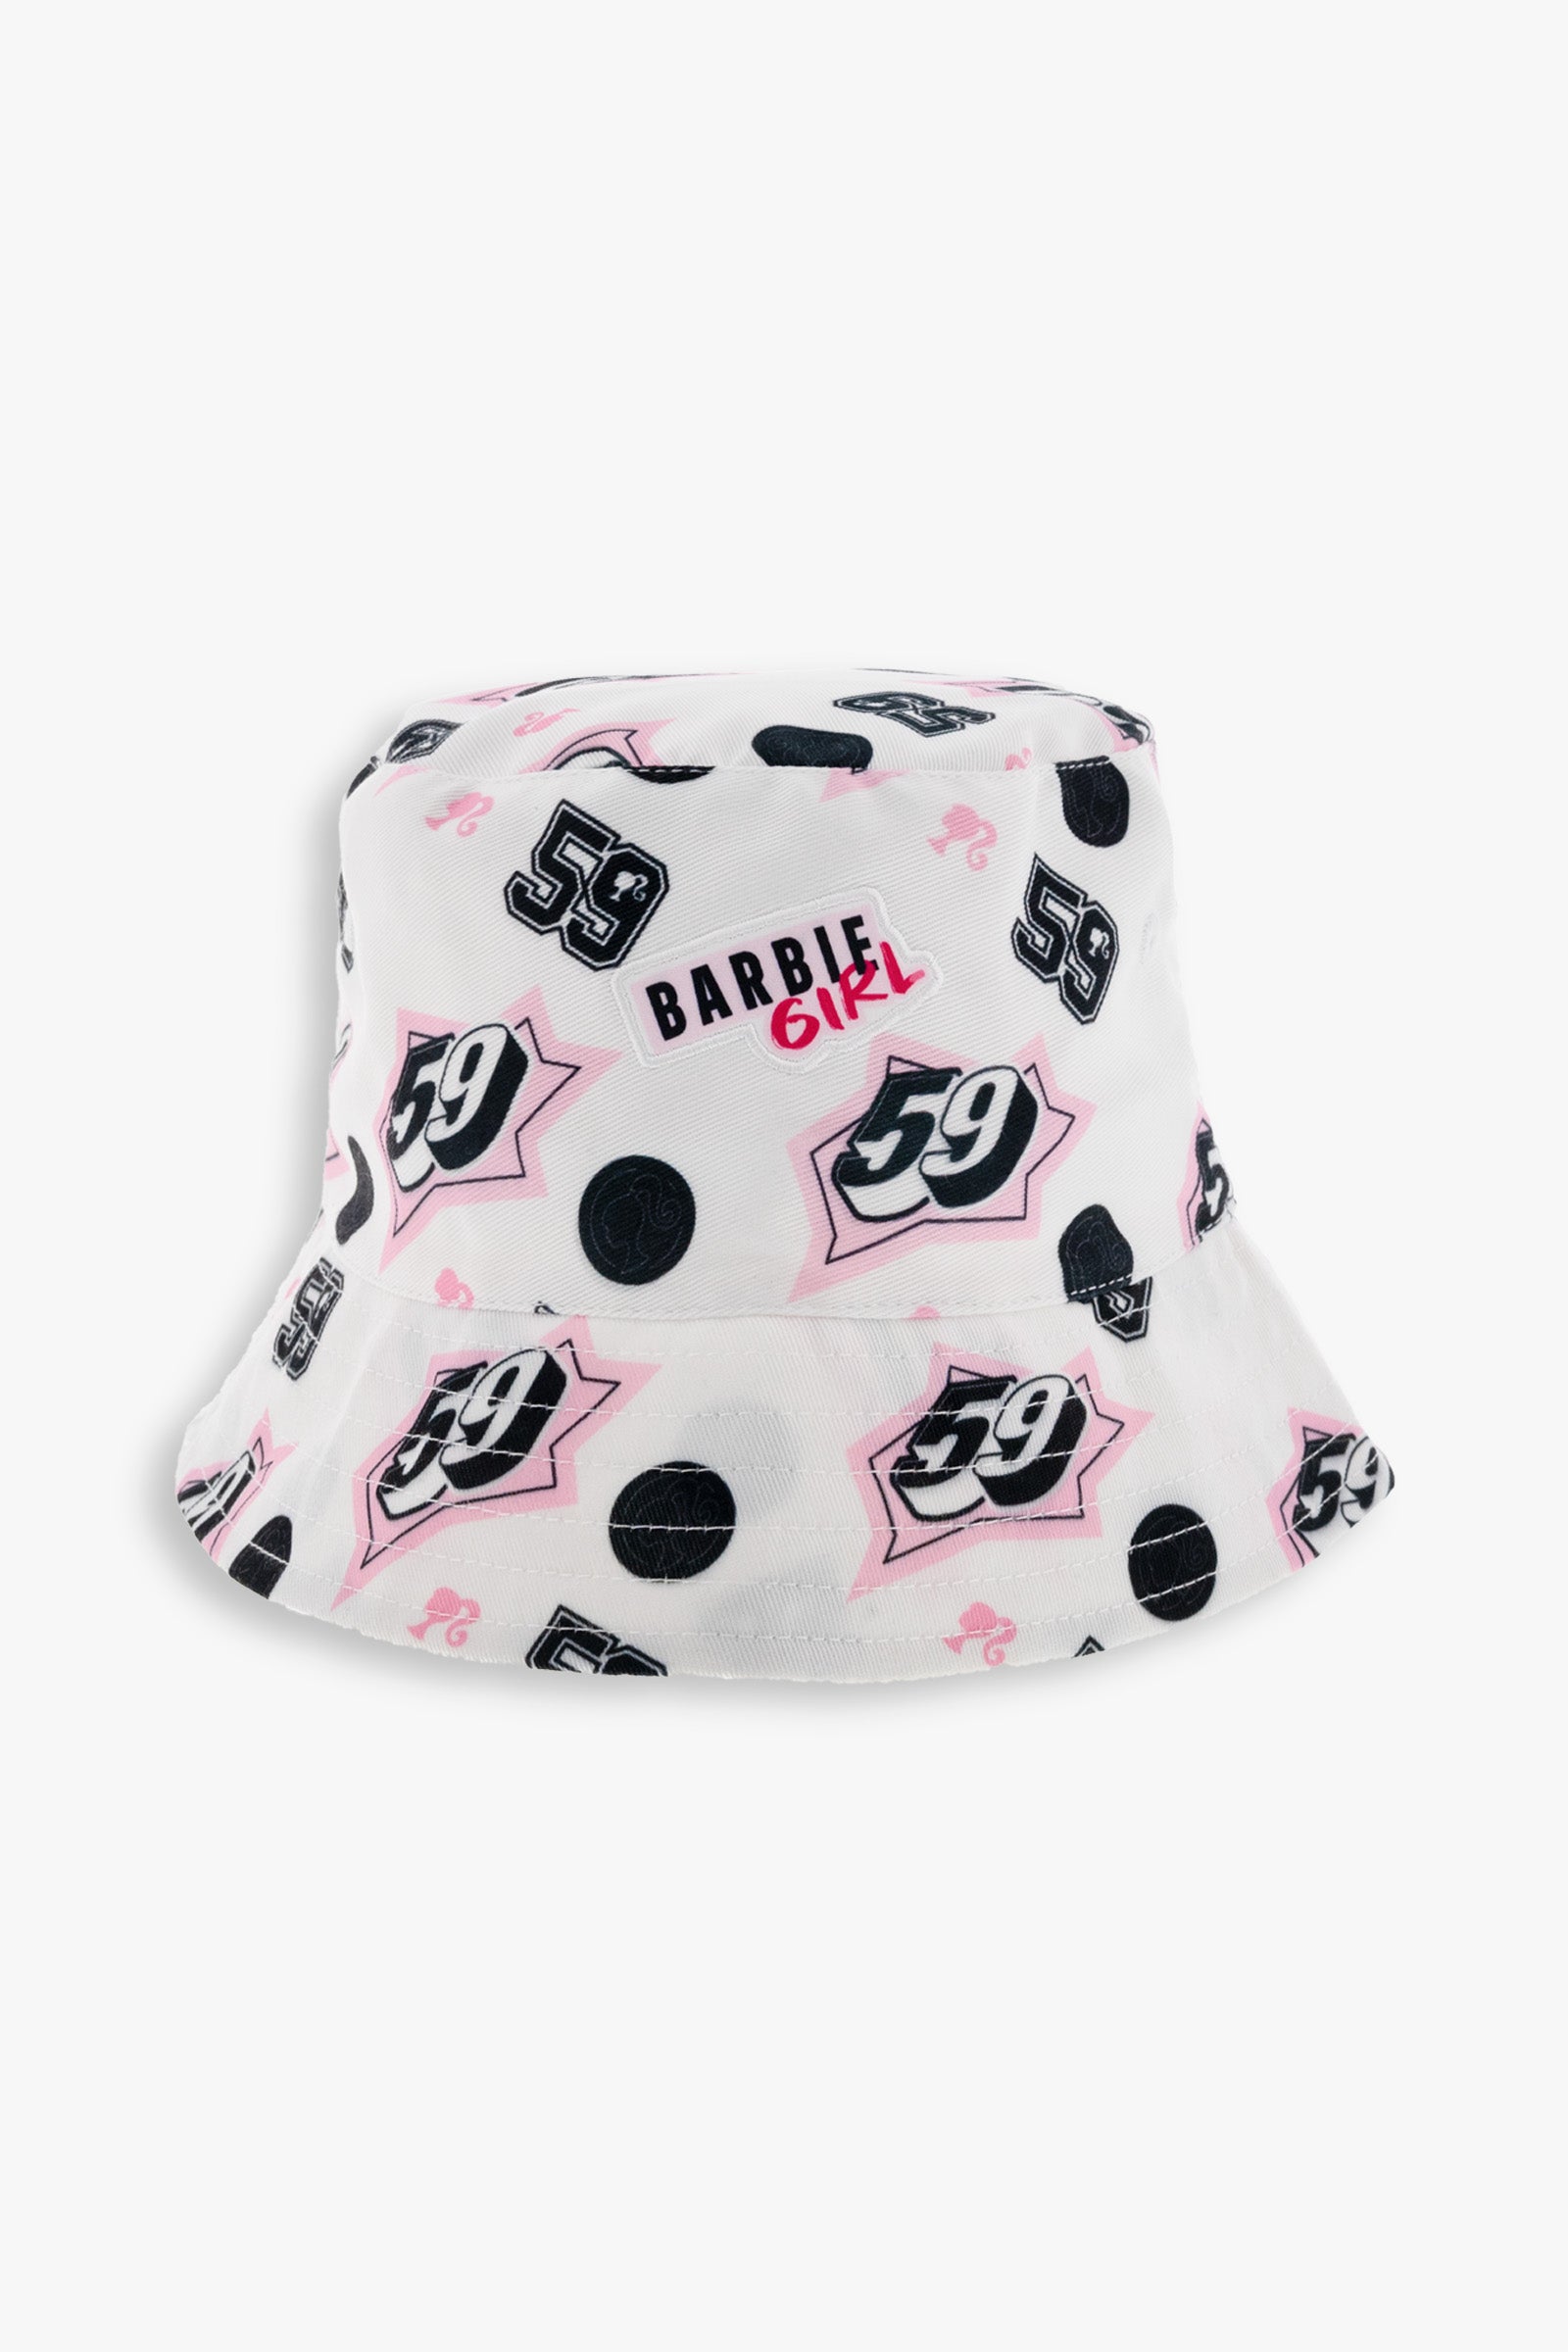 Gertex Barbie Youth Girls Bucket Hat With Embroidered Edge